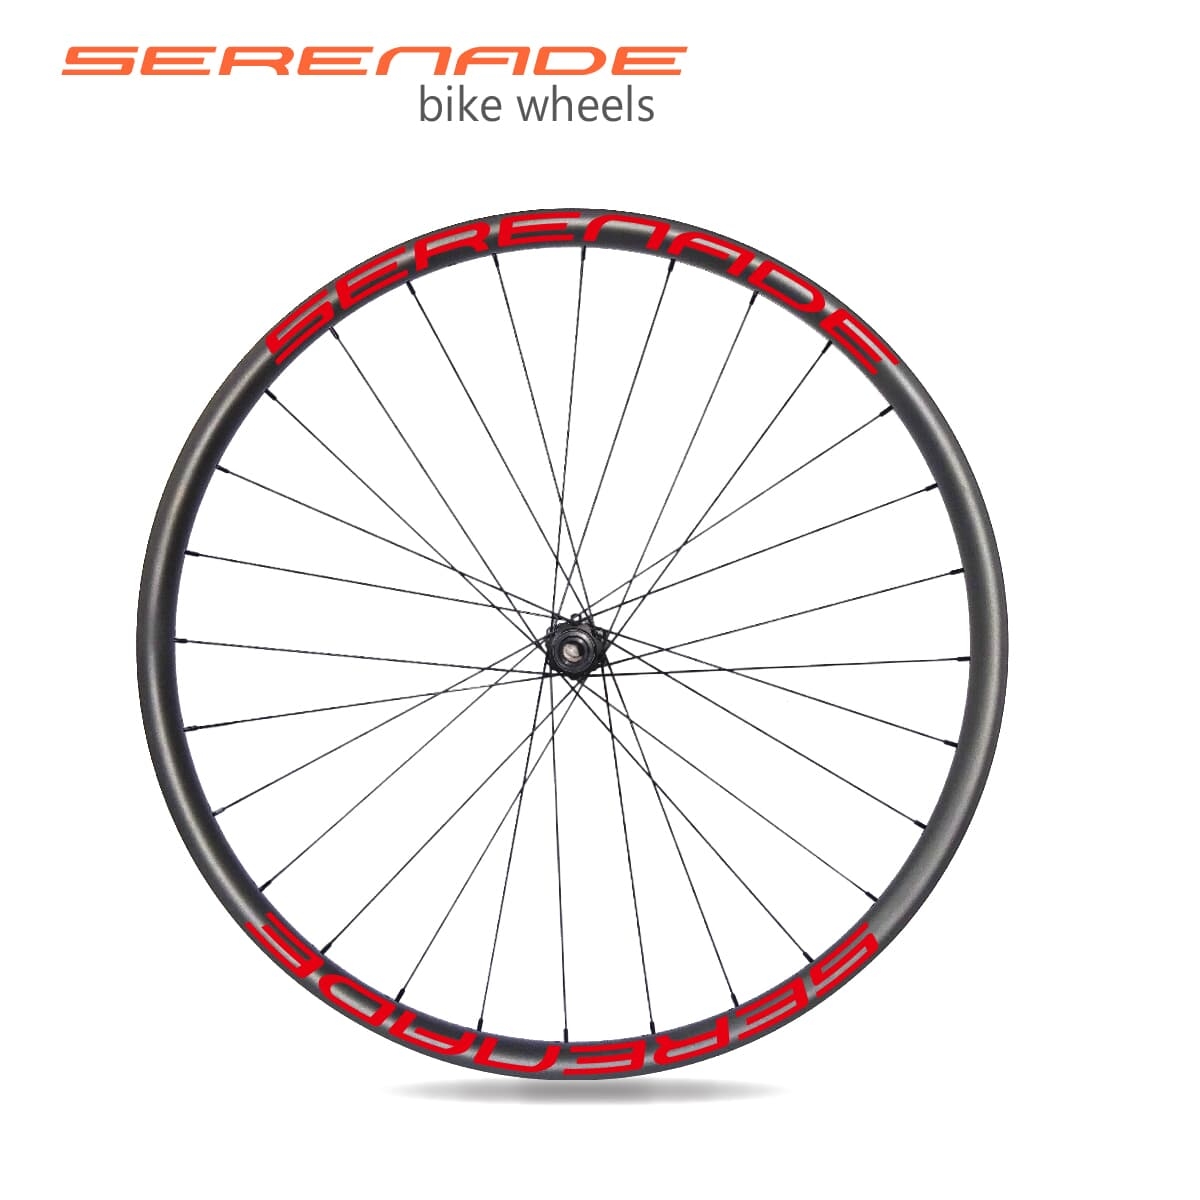 1230g 24mm wide 24mm deep carbon 29er 650b mountain bicycle rims with DT swiss 350 mtb bike wheels 1230gr 24mm carbon mountain bicycle wheelset 29er 650 mtb bike wheels